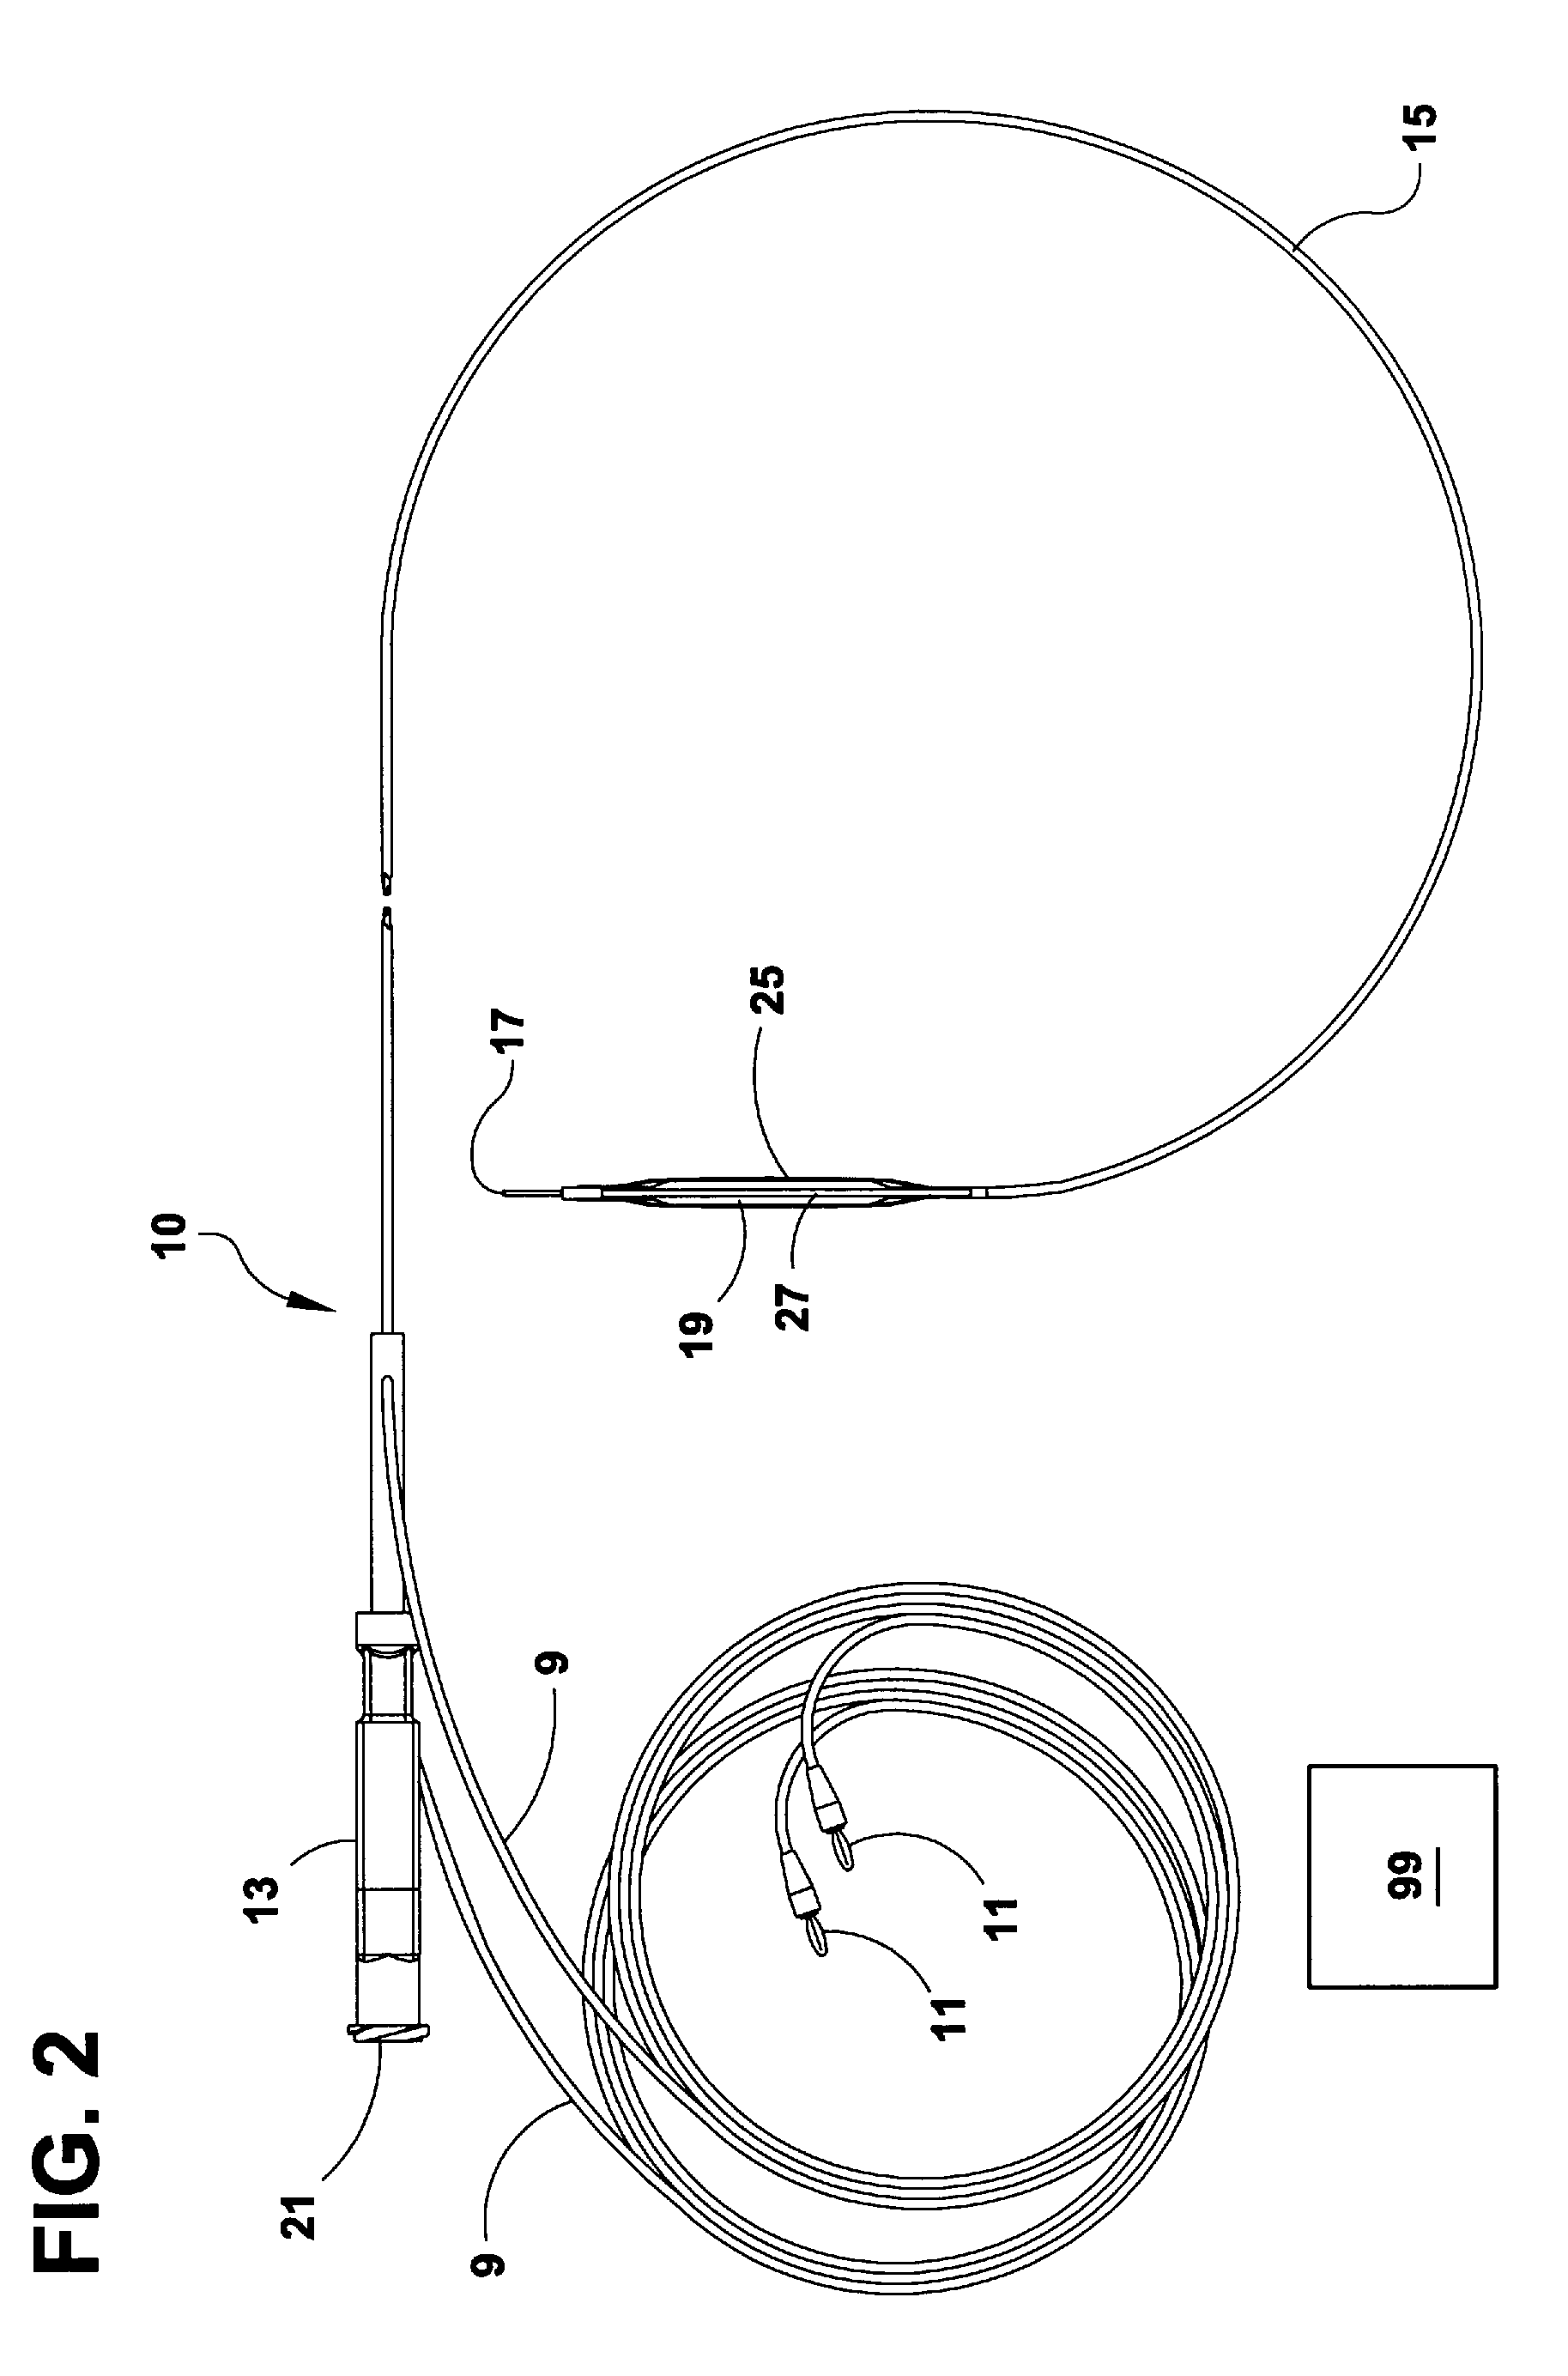 Method for Treatment of Complications Associated with Arteriovenous Grafts and Fistulas Using Electroporation